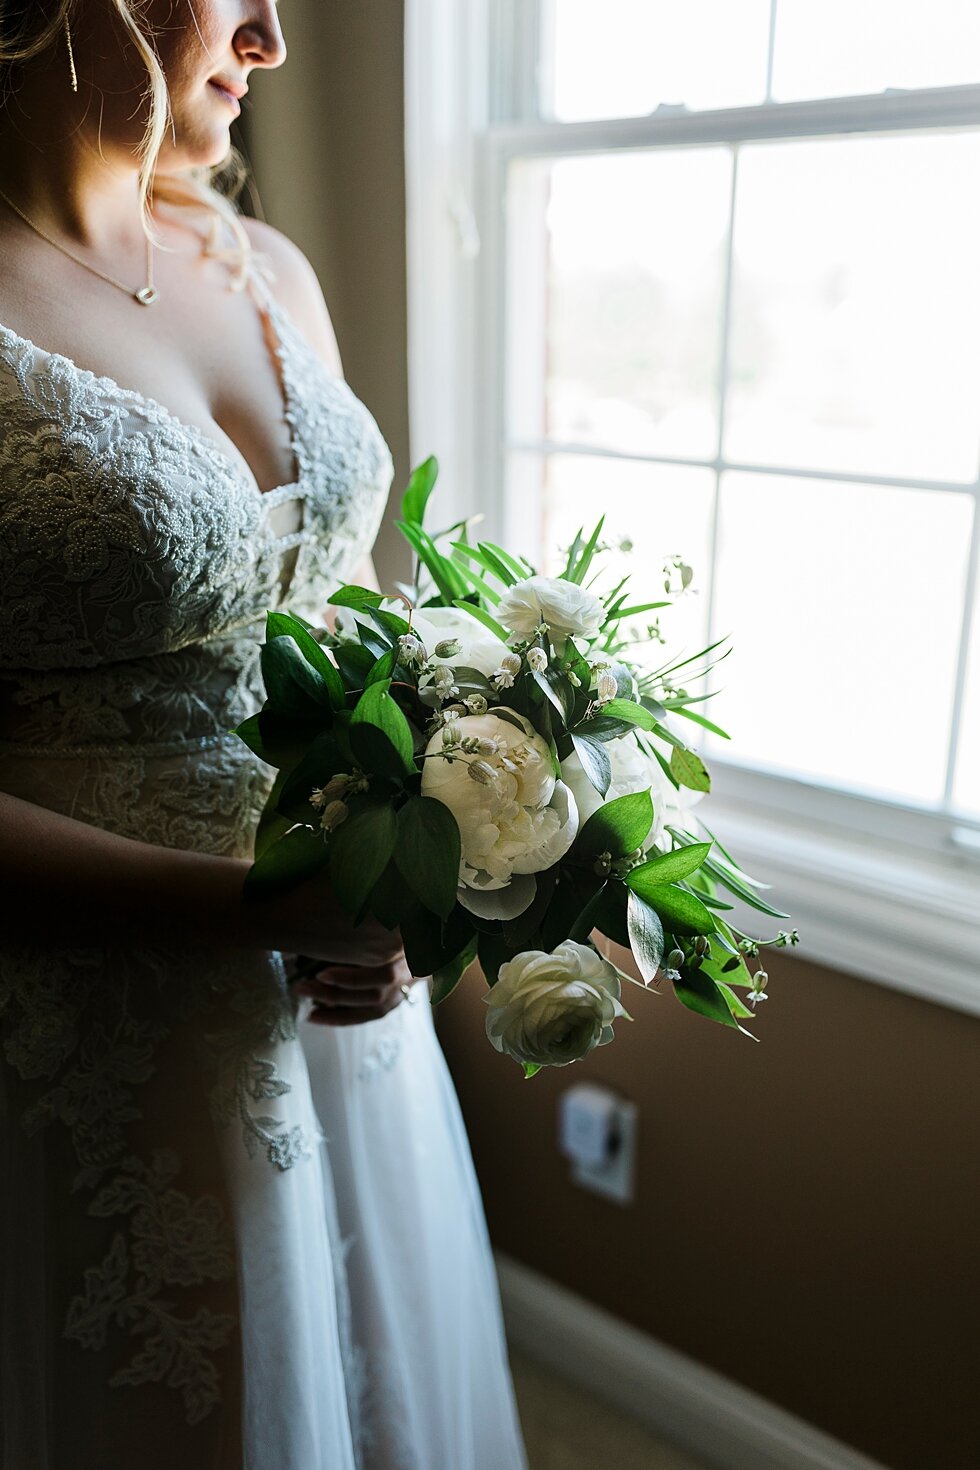  Complete with bridal bouquet, this bride is ready to walk down the aisle. Romantic casual lace wedding gown close friends neutral colors background wedding natural greenery crisp white #midwestphotographer #kywedding #louisville #kentuckywedding #lo